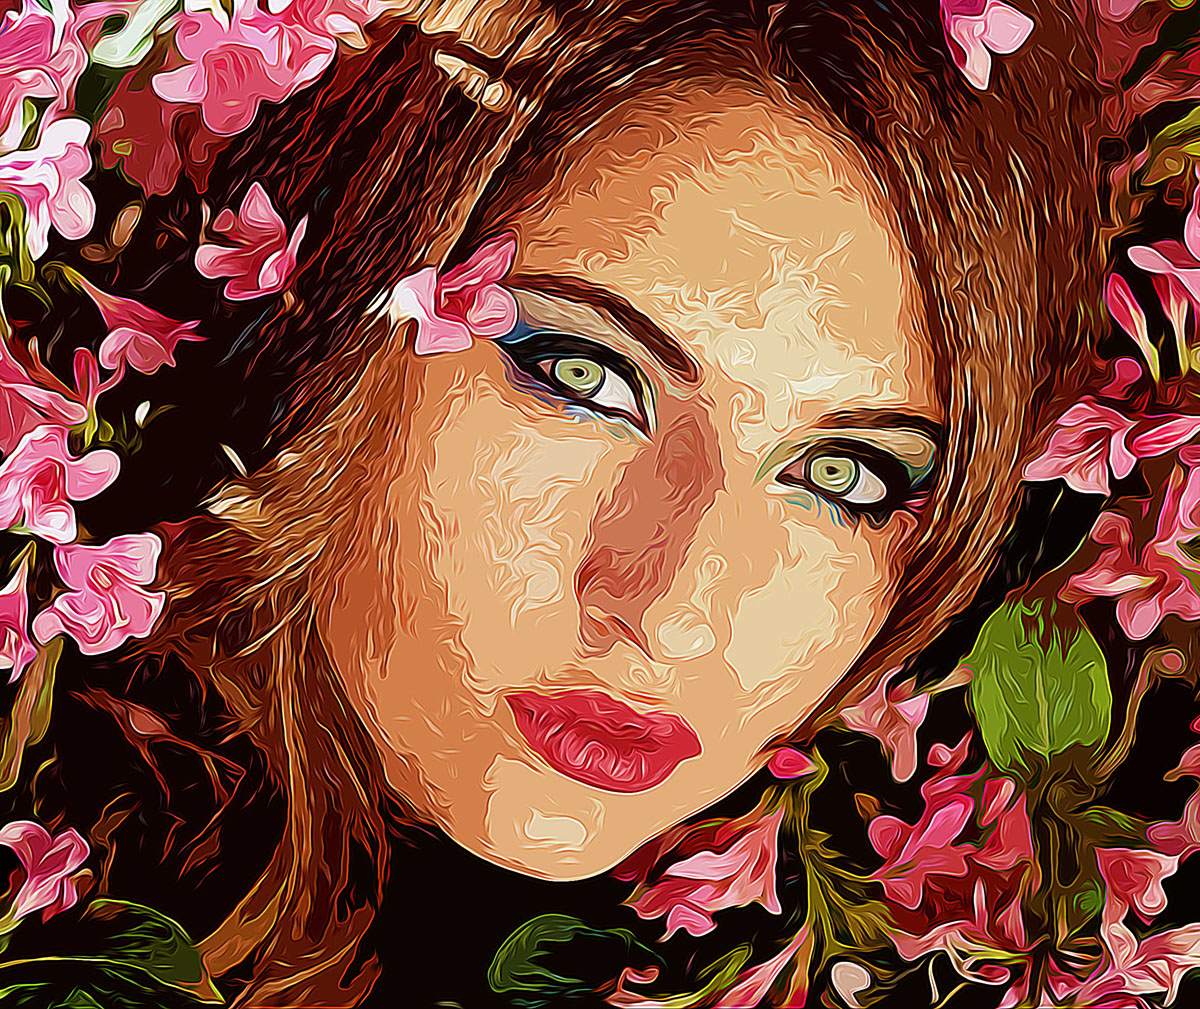 oil painting photoshop action